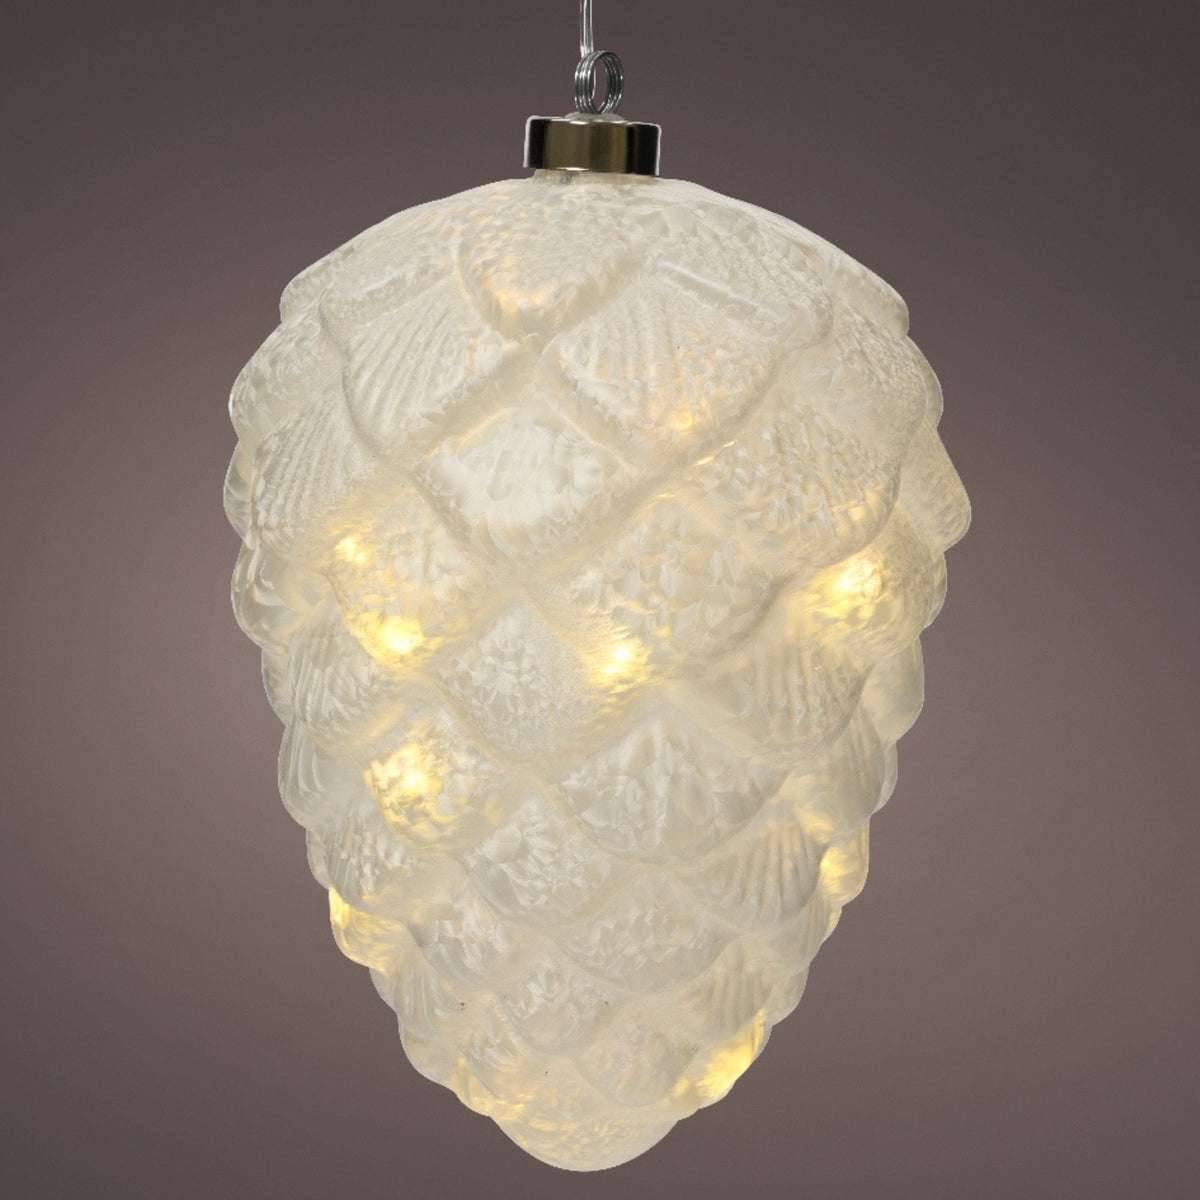 19cm Frosted Glass Hanging Pinecone with Warm White LED's